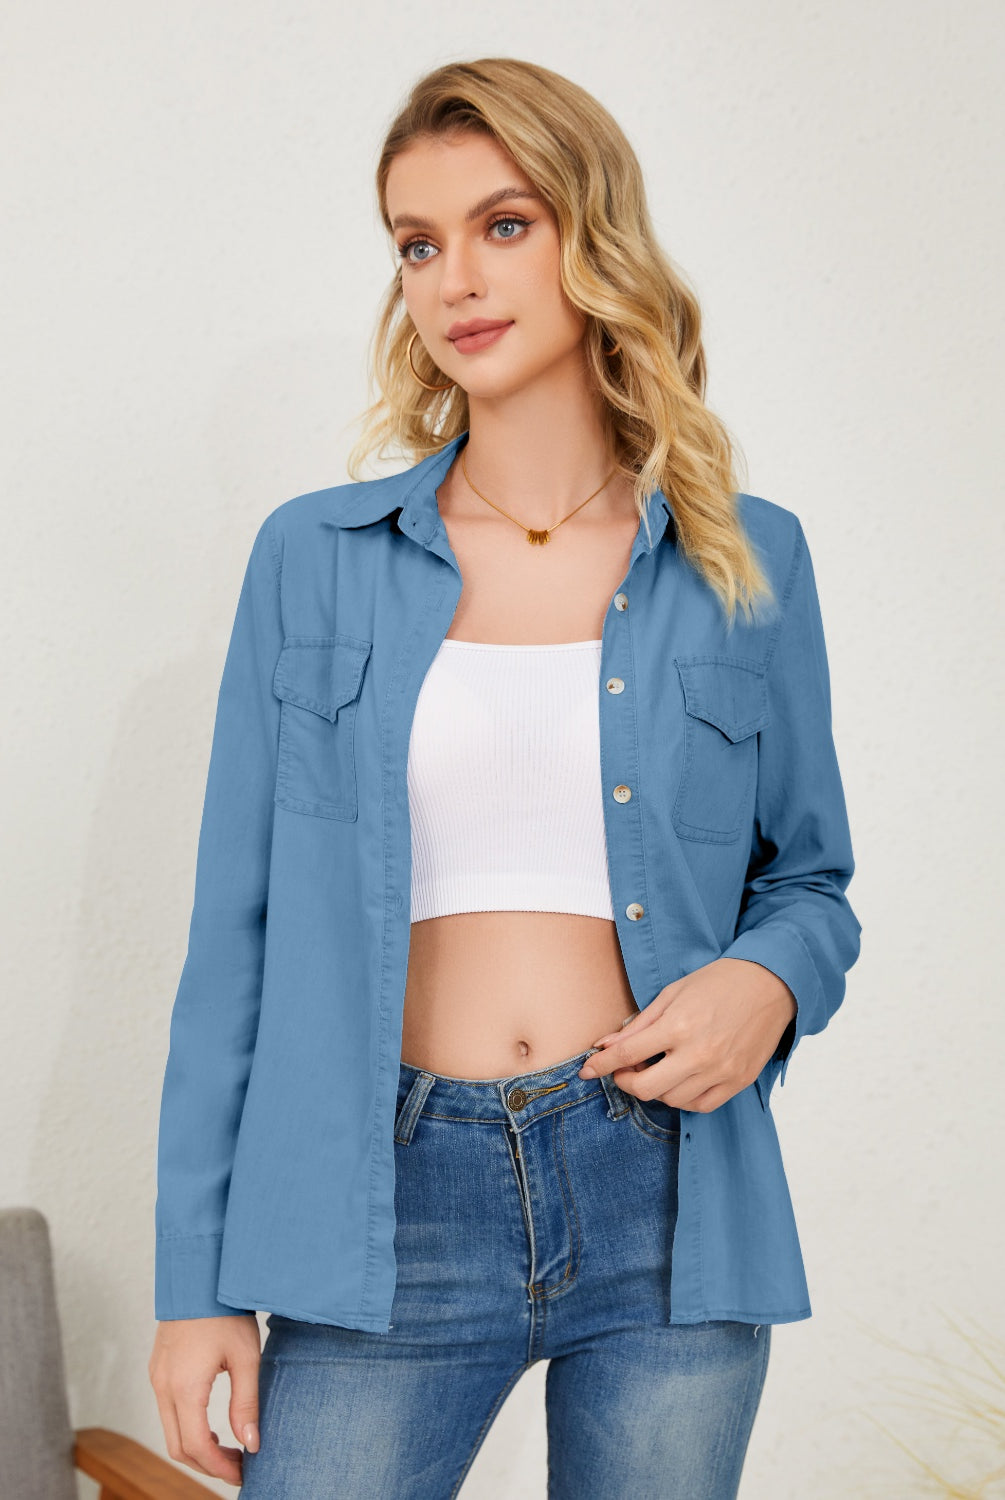 A woman is casually styled in a light denim button-up shirt, left open to reveal a white crop top underneath, and paired with blue jeans for a cohesive, double-denim look.